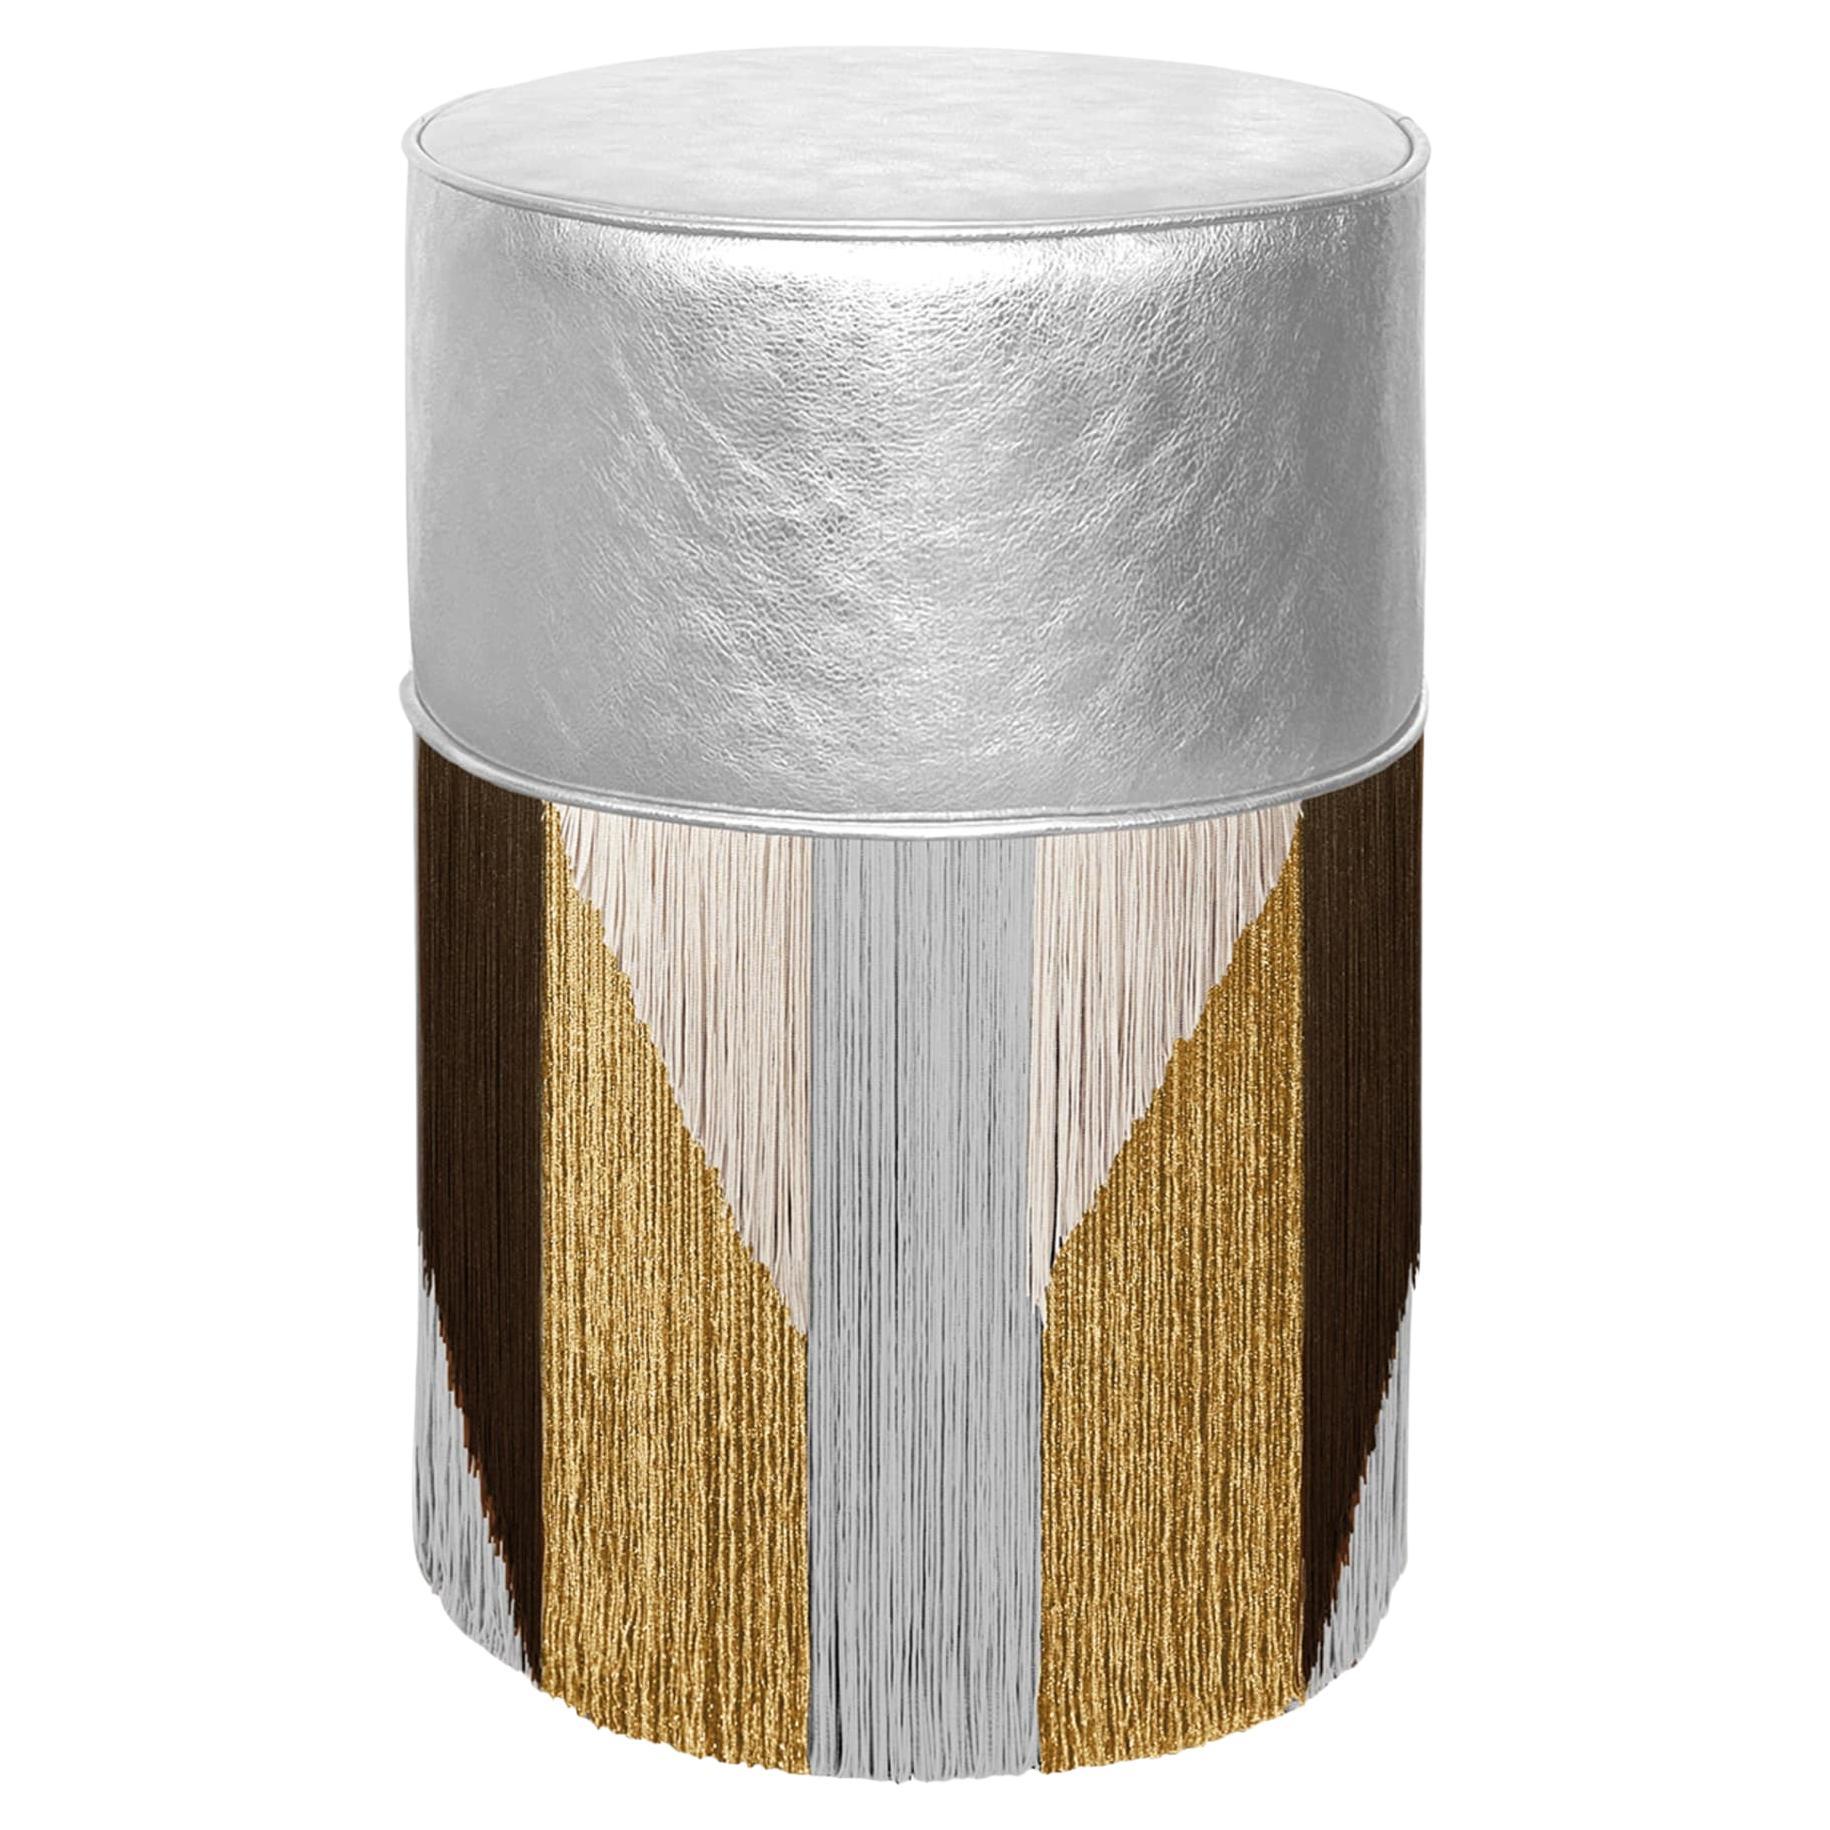 Gleaming Tribe Silver Metallic Leather Pouf by Lorenza Bozzoli For Sale